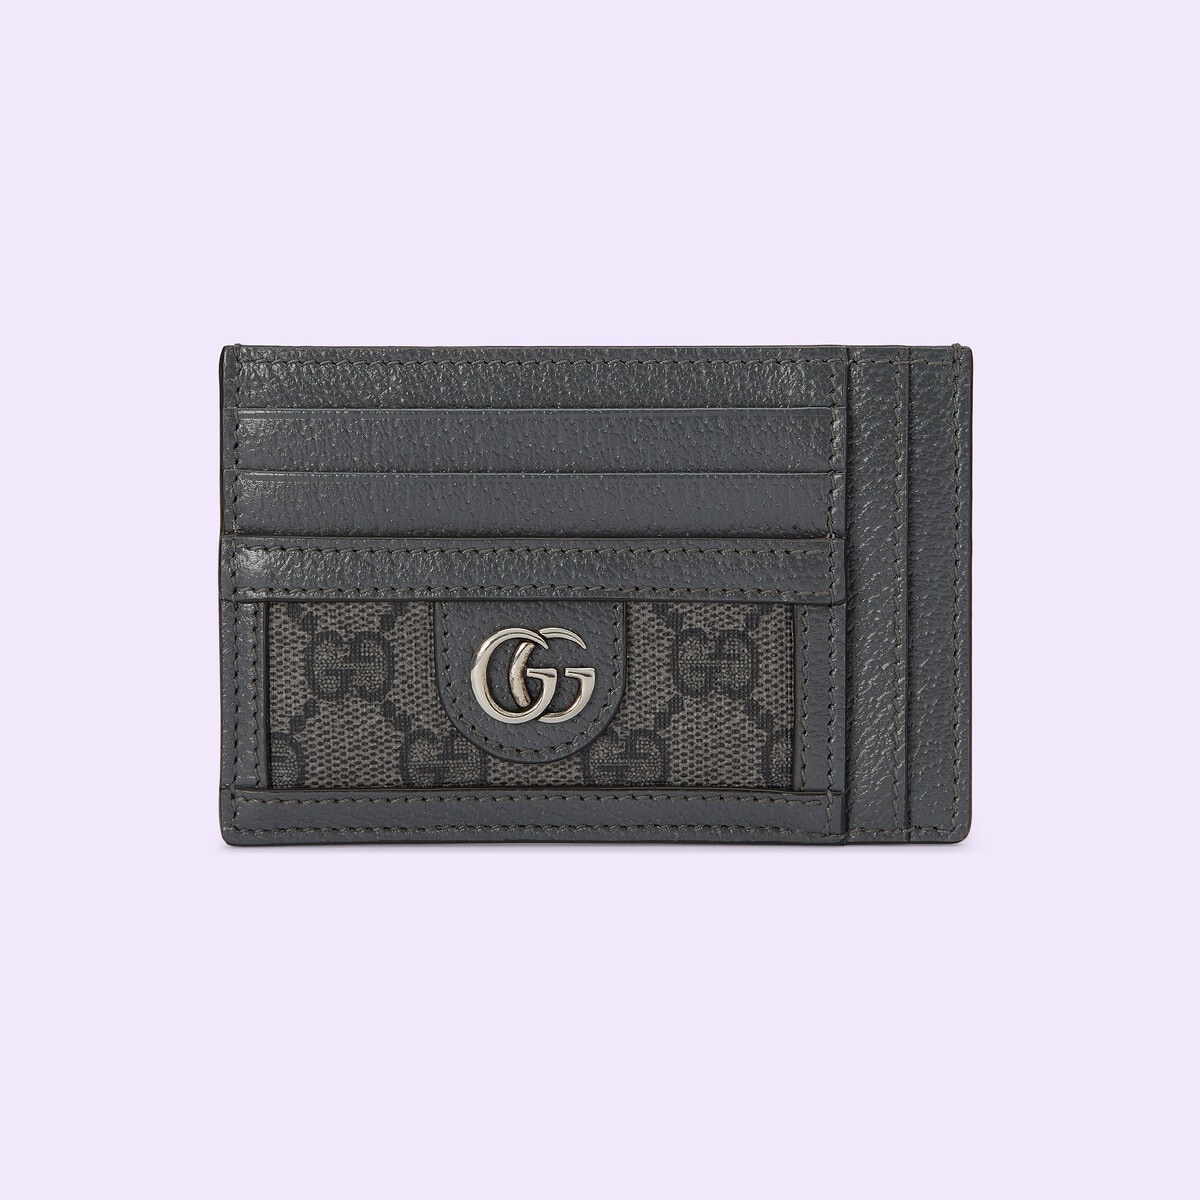 Ophidia card case - 1